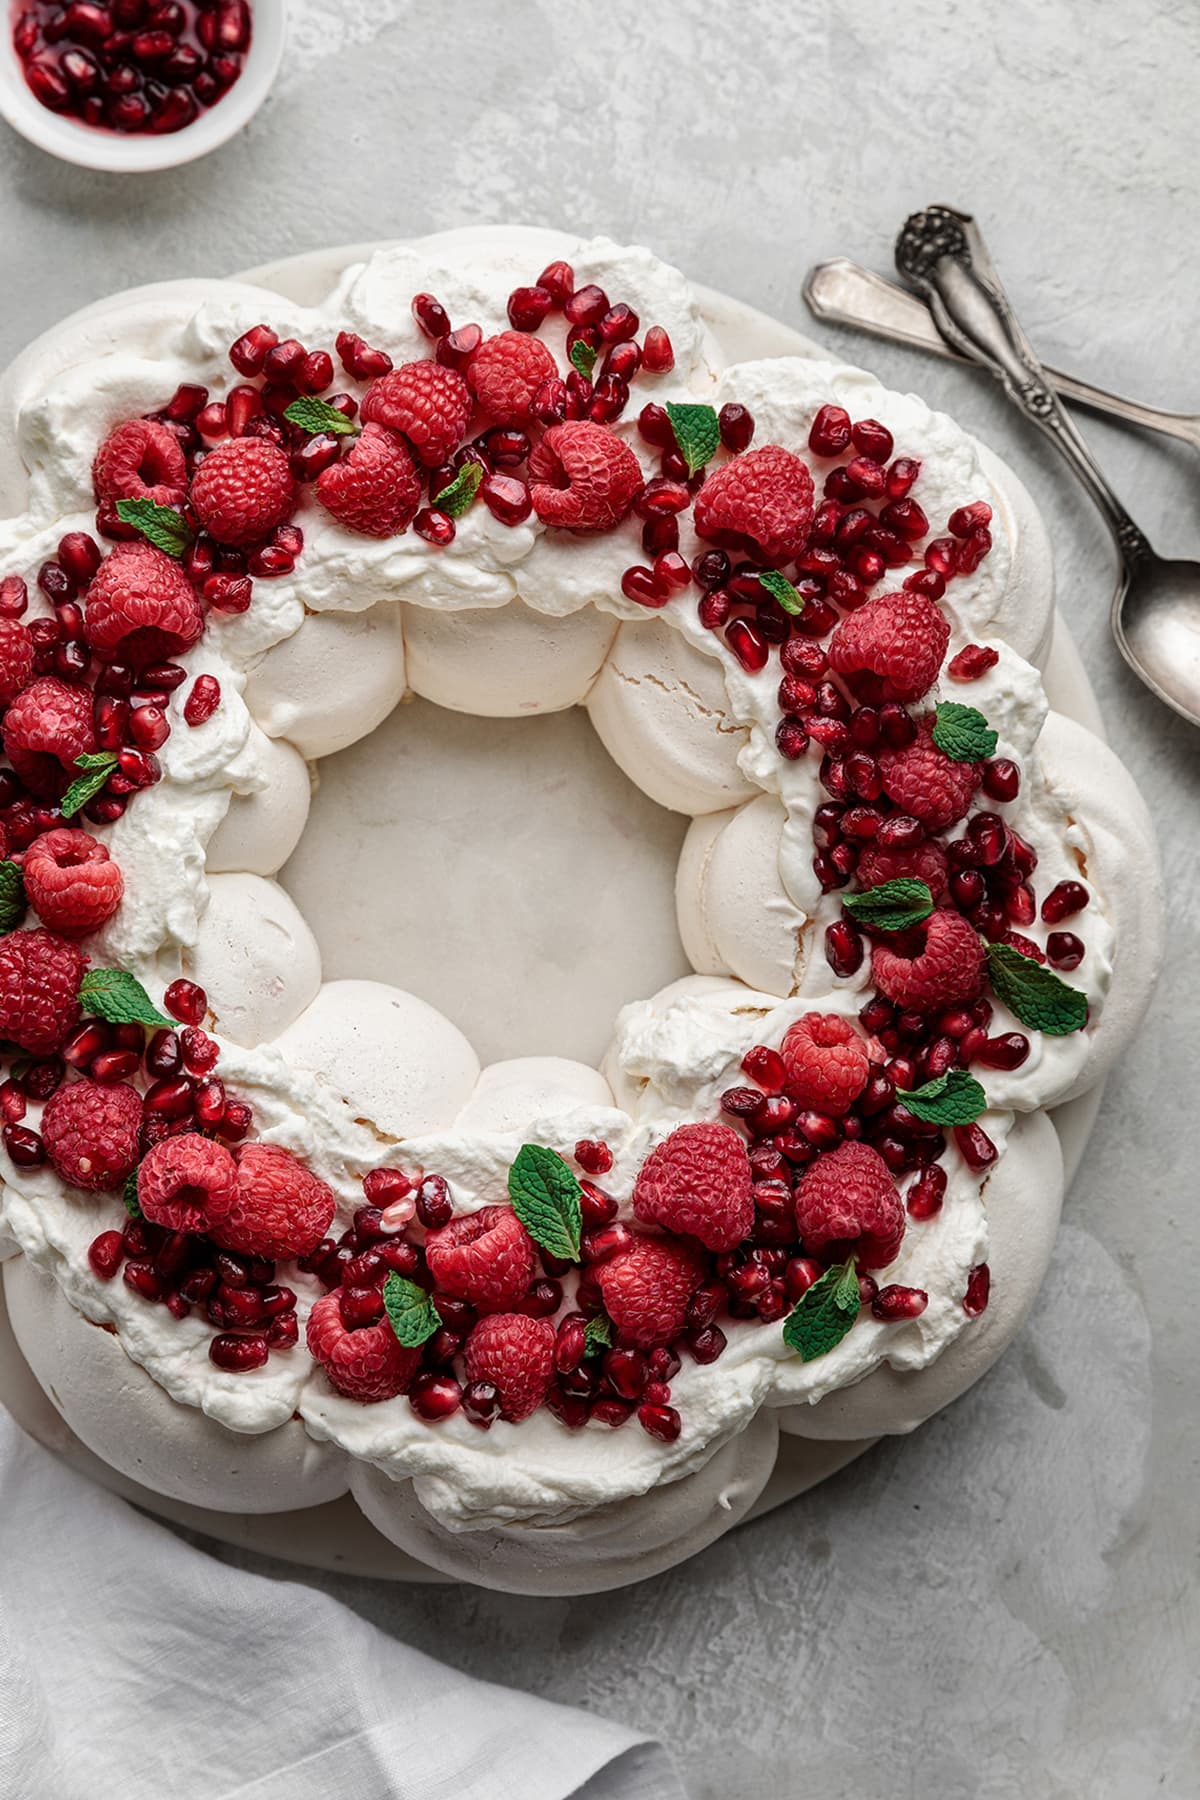 Crunchy meringue shell with a marshmallow-like center Christmas Pavlova Wreath topped with almond cream and raspberries.